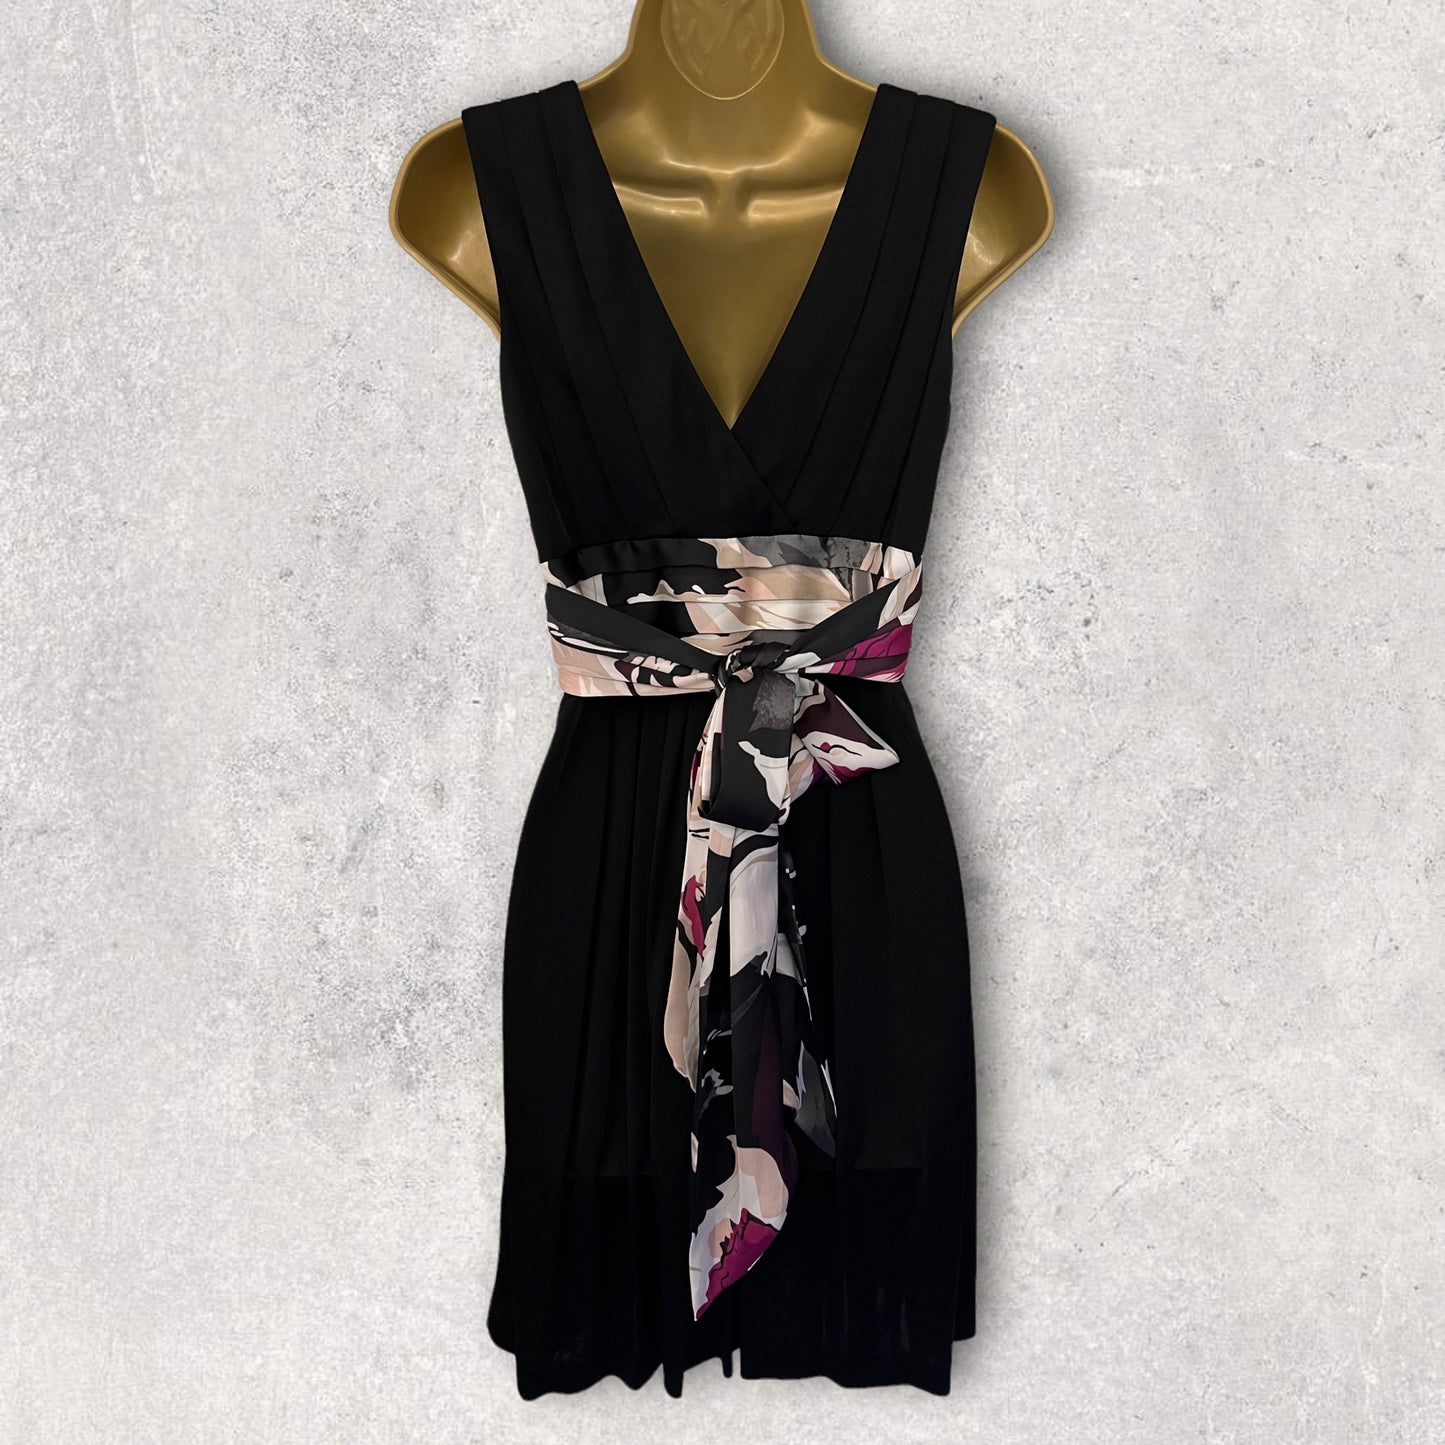 Ted Baker Black Silky Floral Tie Fit & Flare Dress UK 8 US 4 EU 36 Timeless Fashions